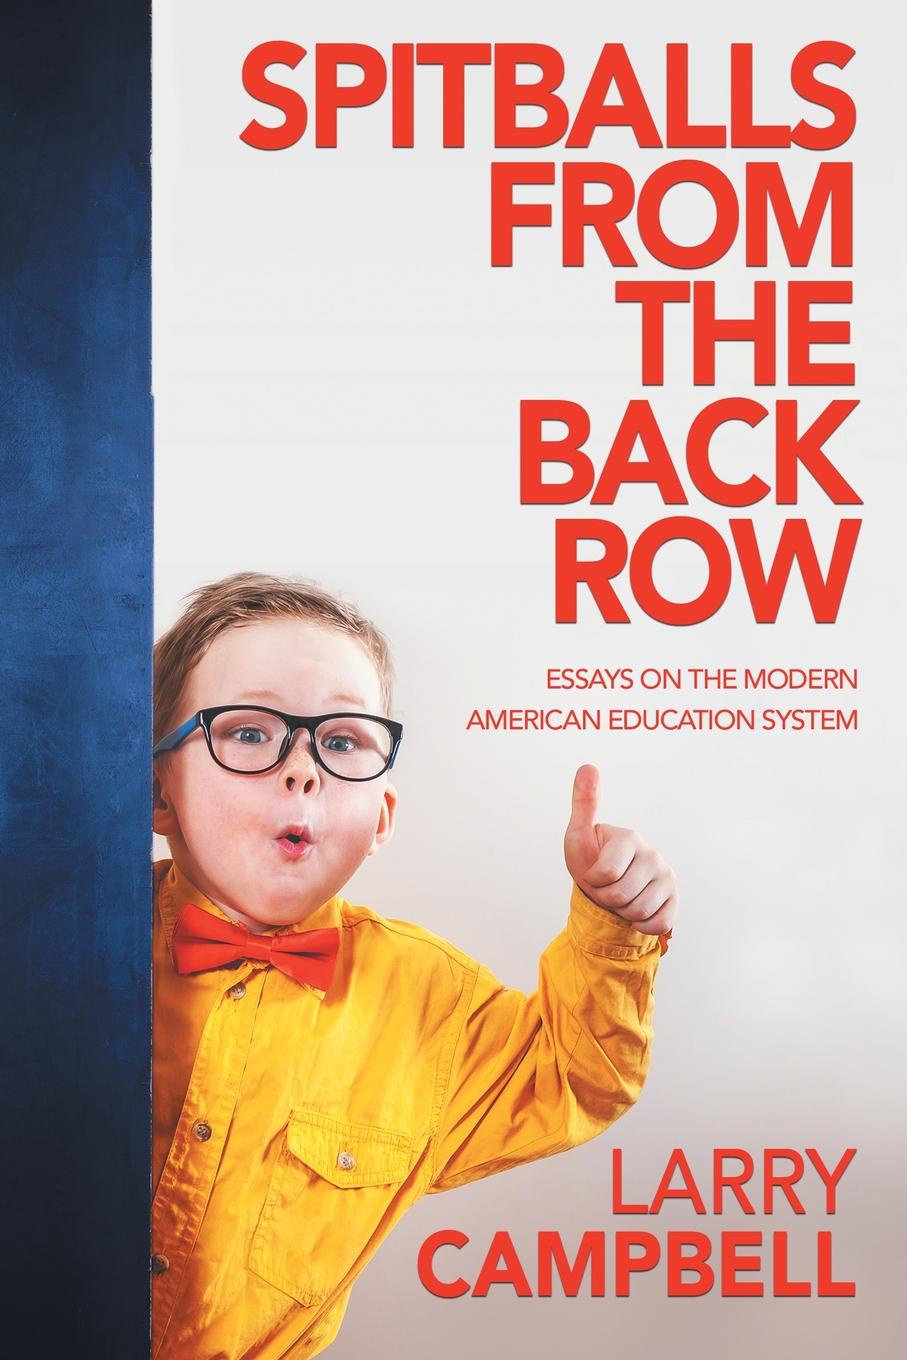 Spitballs from the Back Row. Essays on the Modern American Education System